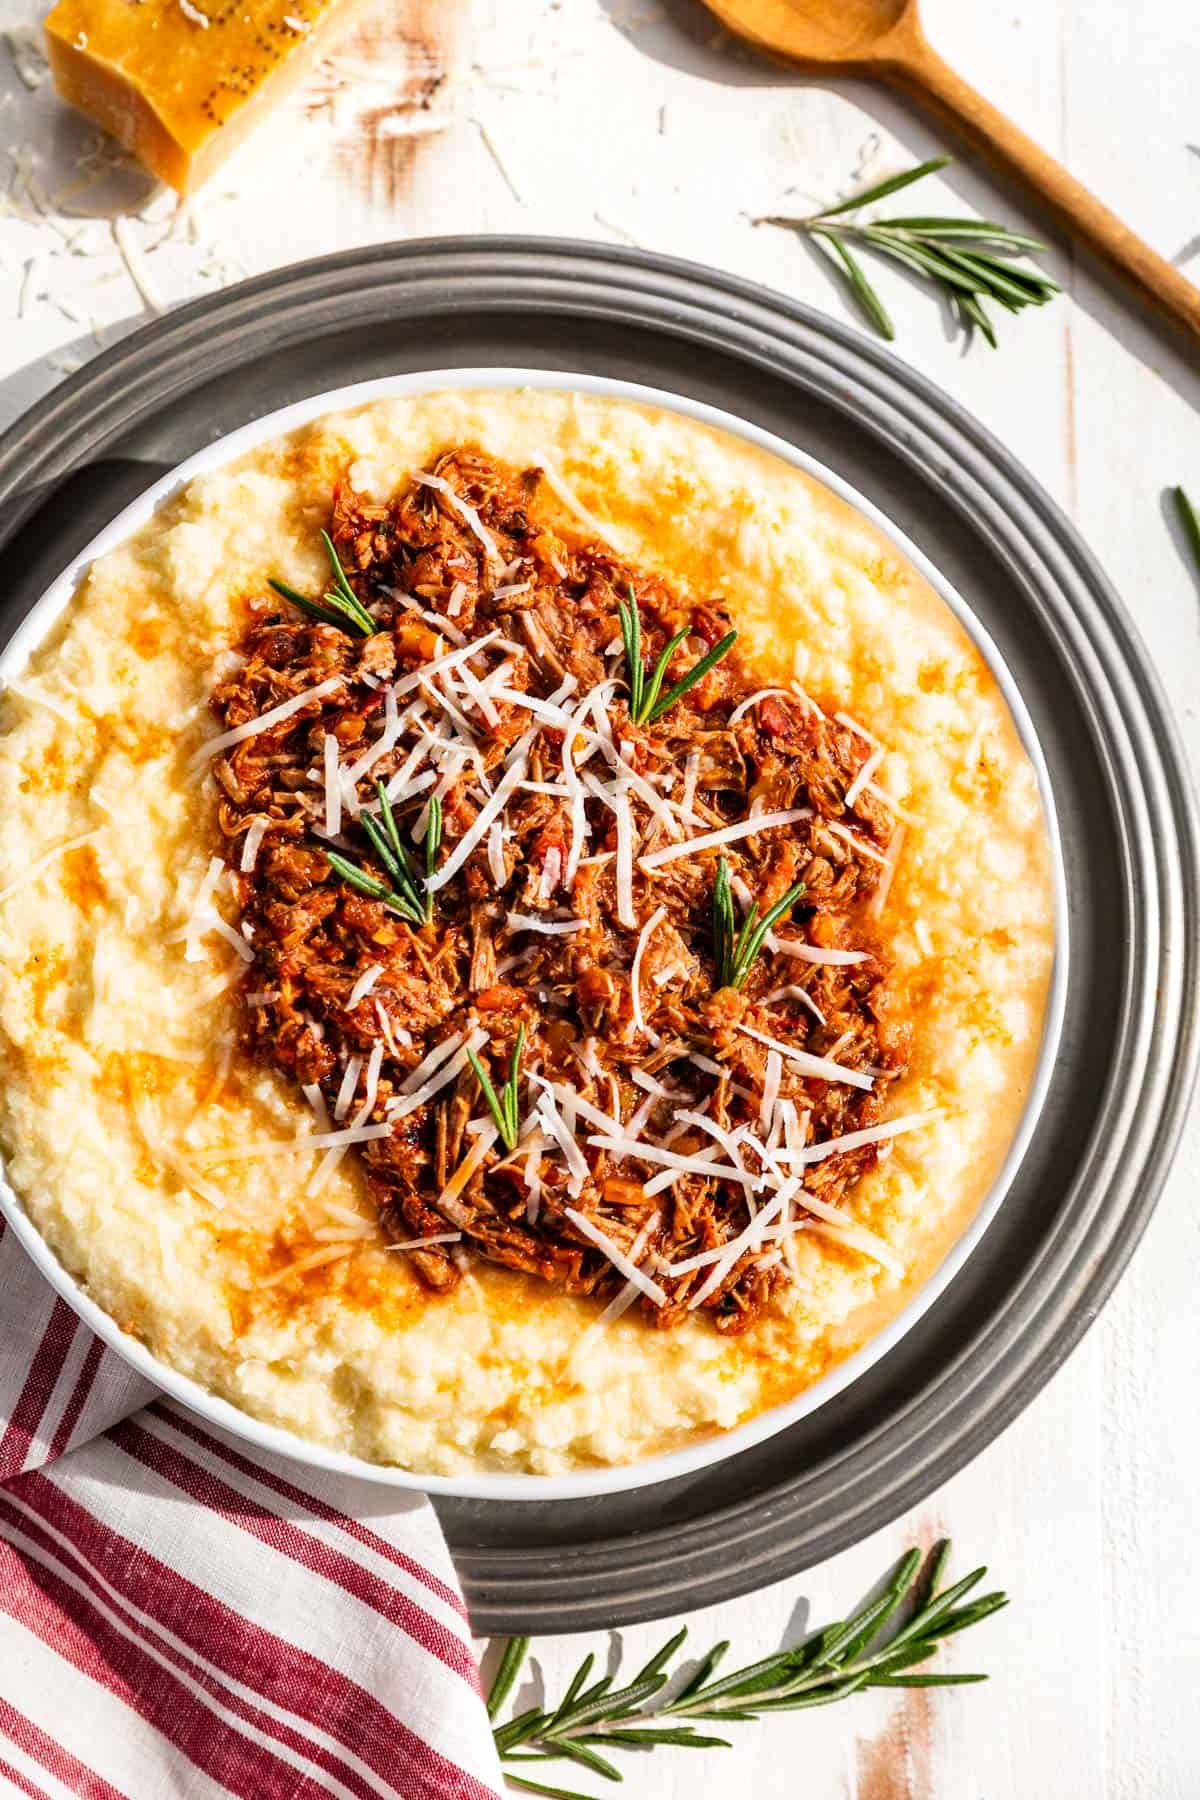 Pork ragu spooned over cauliflower polenta in a large white serving bowl topped with grated parmesan and garnished with rosemary sprigs.